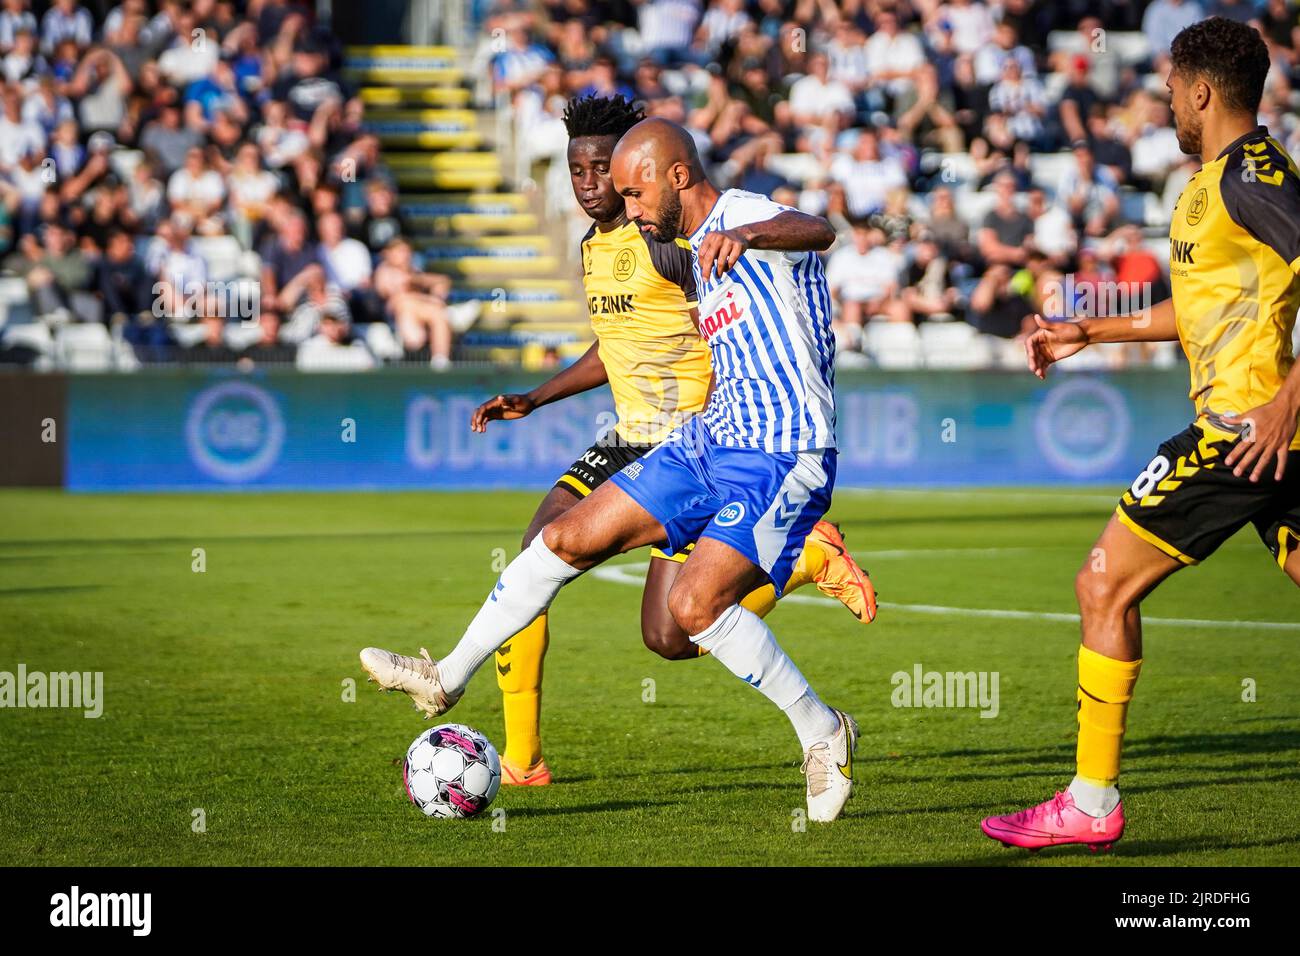 Ac horsens v odense boldklub hi-res photography and images - Page - Alamy